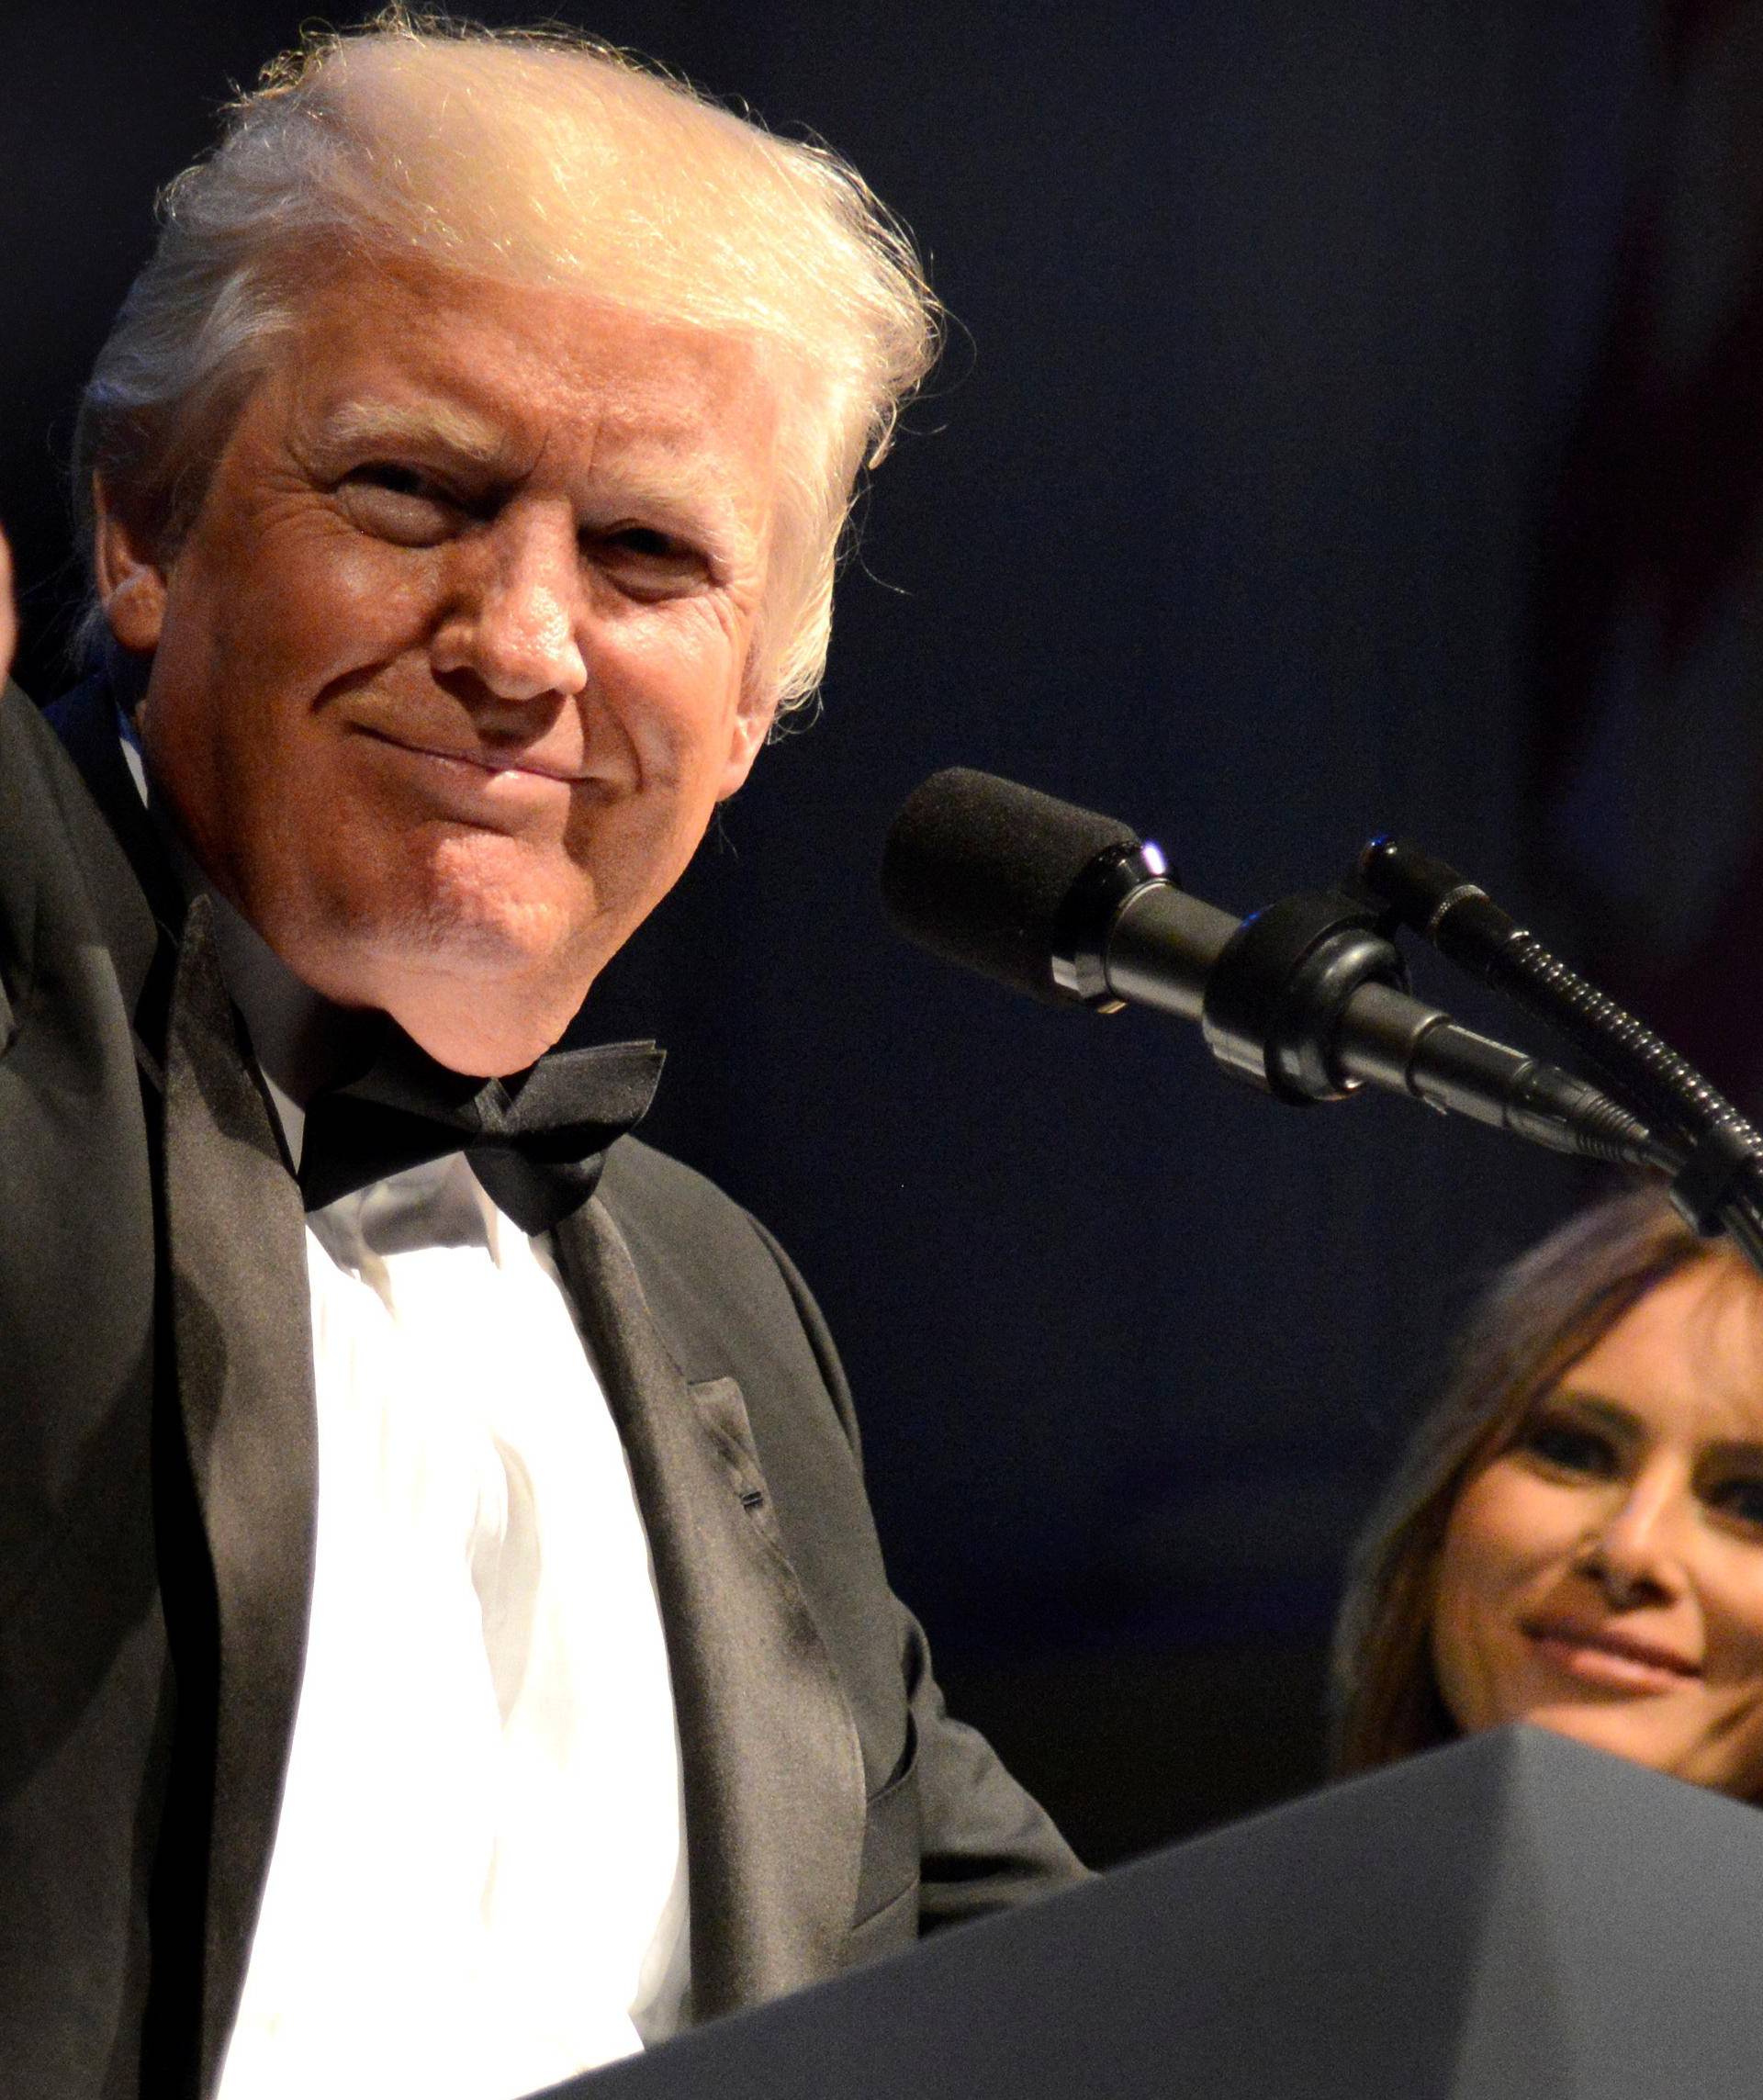 President Trump and First Lady Melania Trump attend Ford's Theatre Gala in Washington